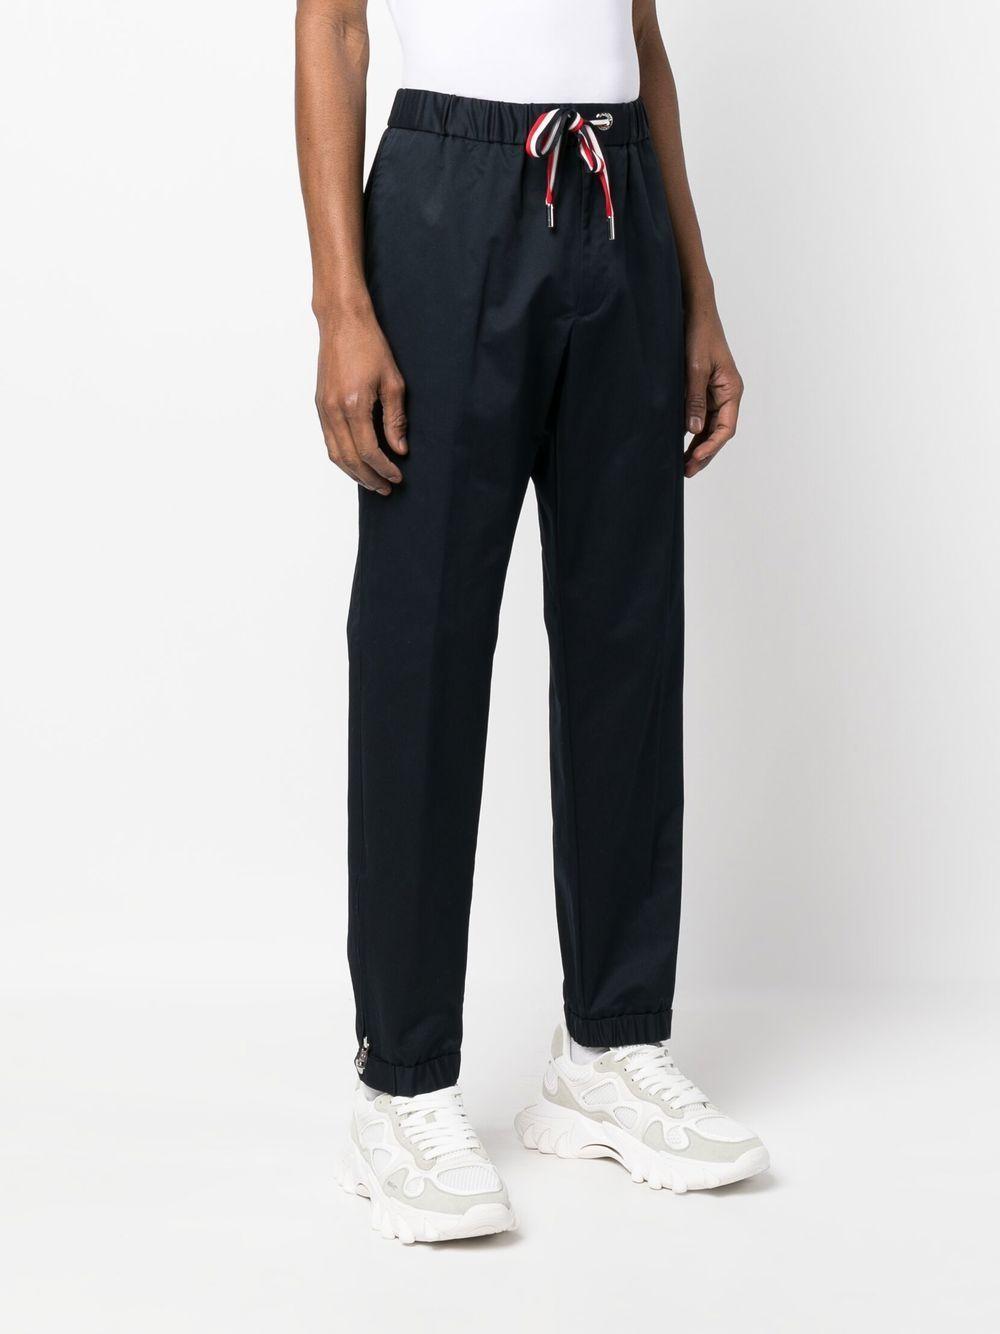 MONCLER Blue Cotton Trousers with Striped Detail for Men